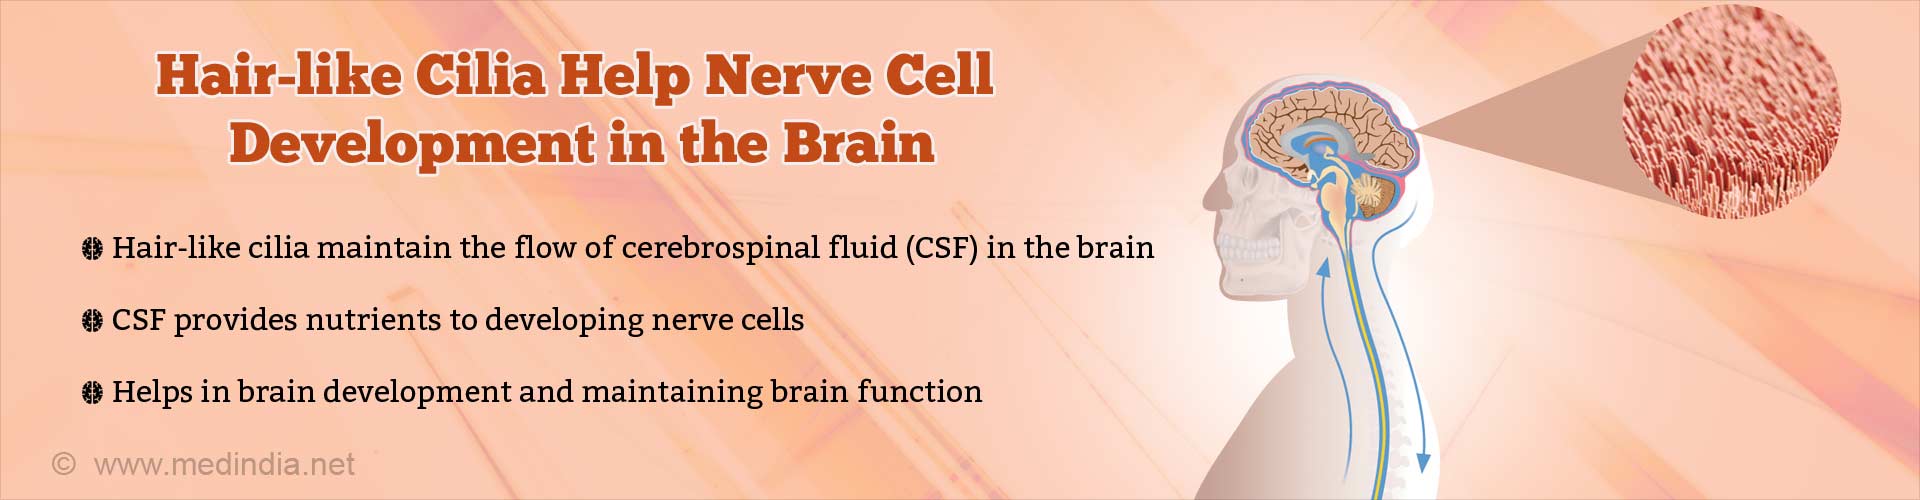 Hair-like cilia help nerve cell development in the brain. Hair-like cilia maintain the flow of cerebrospinal fluid (CSF) in the brain. CSF provides nutrients to developing nerve cells. Helps in brain development and maintaining brain function.